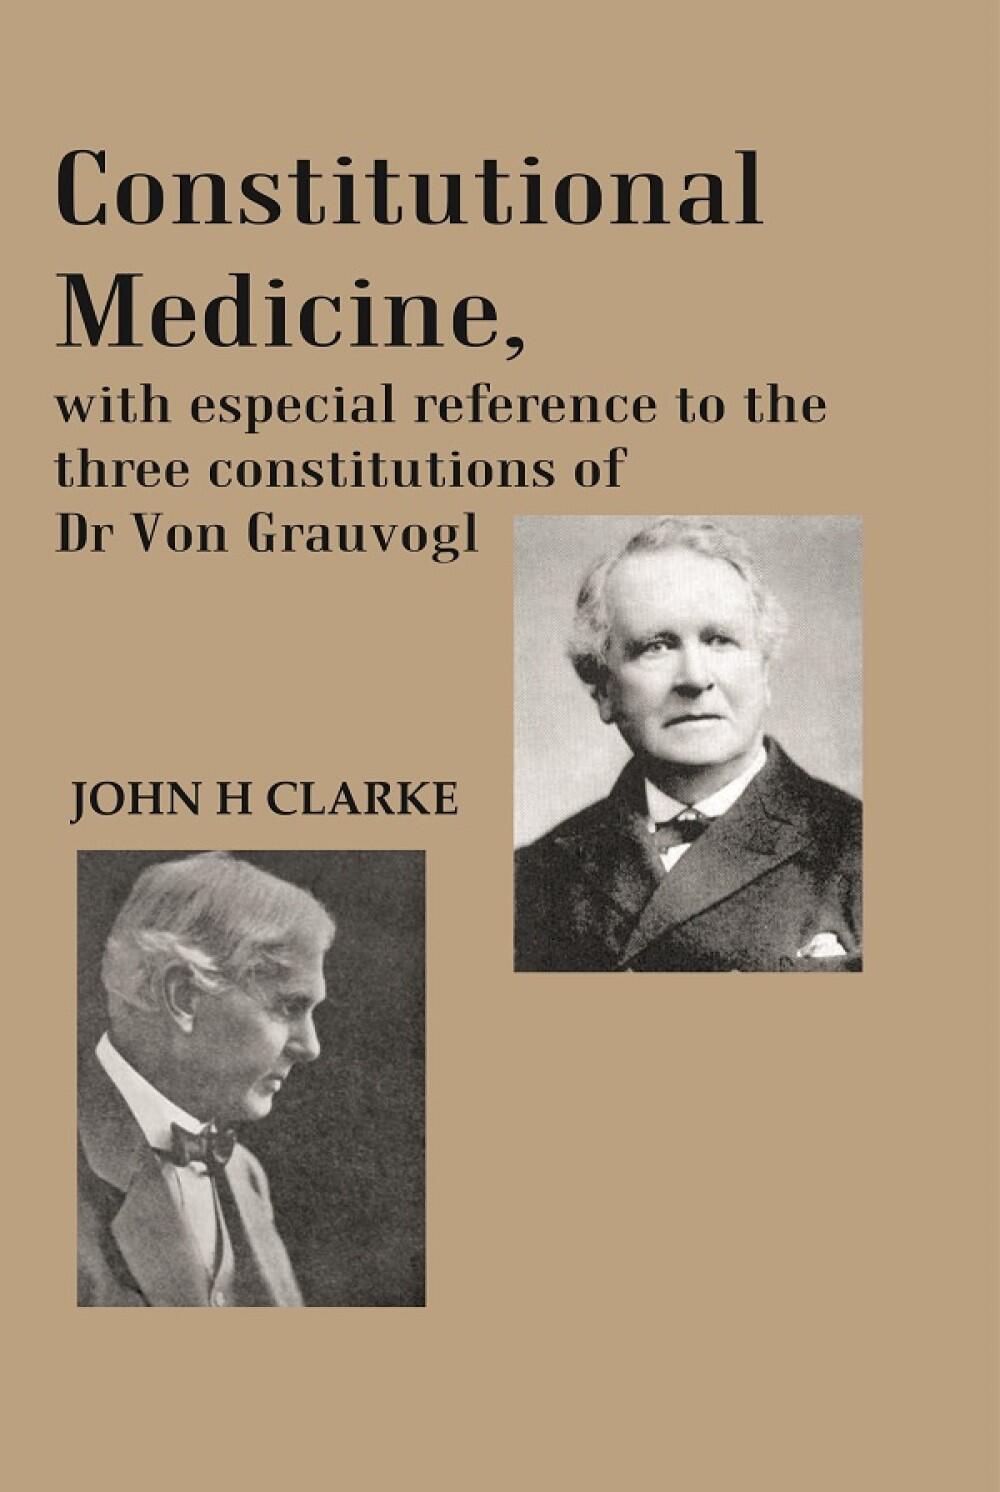 Constitutional Medicine, with especial reference to the three constitutions of Dr Von Grauvogl  